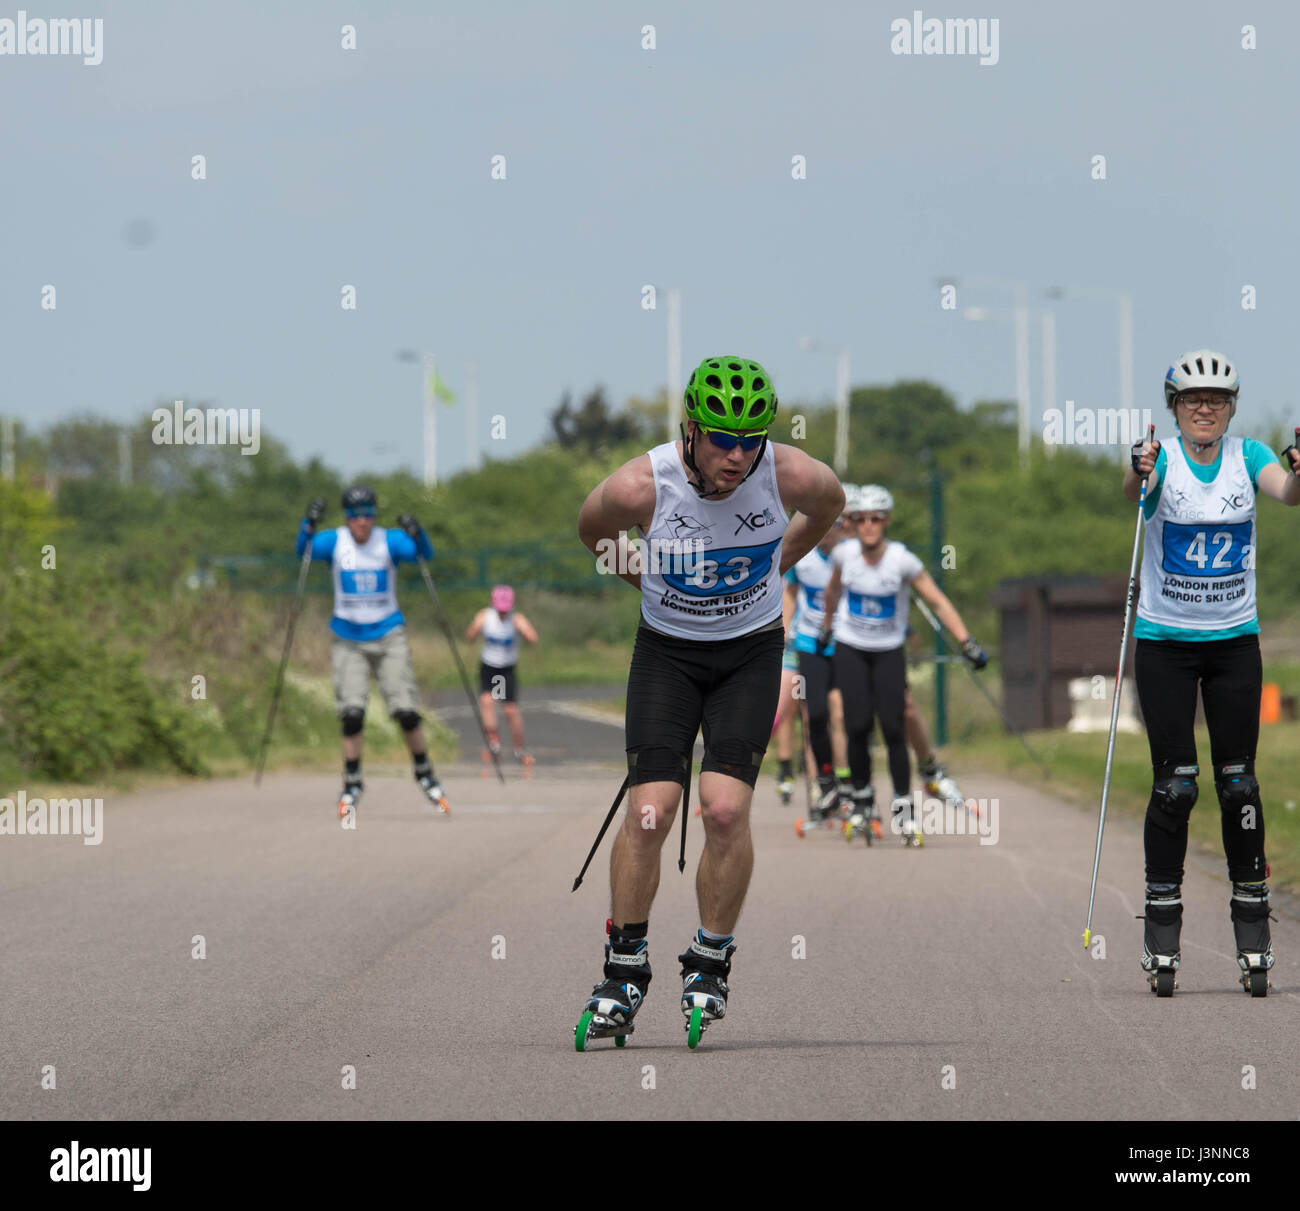 London, UK. 7th May, 2017. Rollerski Race 15k hosted by London Cross-Country Ski Club at Hillindon Cycle Circuit West London, UK. 7th May, 2017. number 33 Mantas Strolia the over all winner of the race in a time off 30.20 here Mantas is free skating Credit: Brian Southam/Alamy Live News Stock Photo